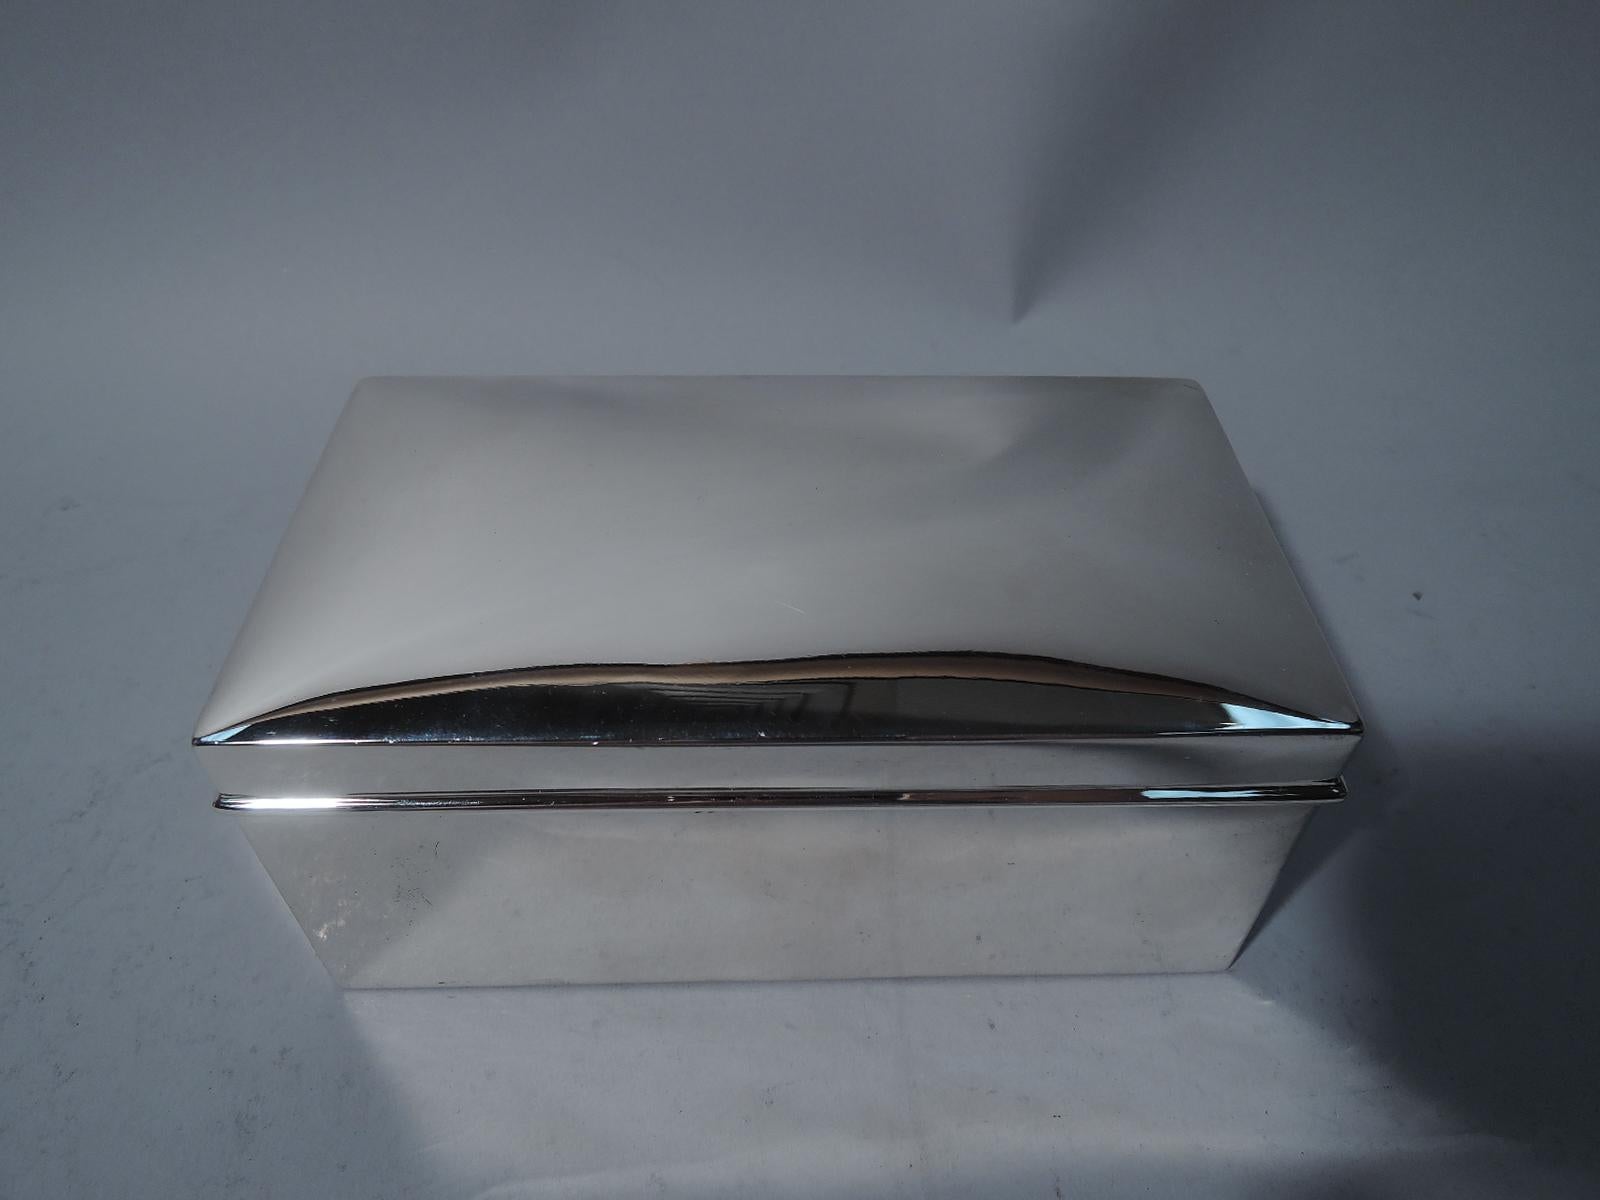 Modern sterling silver casket box. Made by Woods & Chatellier for Tiffany & Co., both in New York. Rectangular with straight sides. Cover is hinged with gently curved top and molded rim. Box and cover interior cedar-lined. Hallmark includes maker's